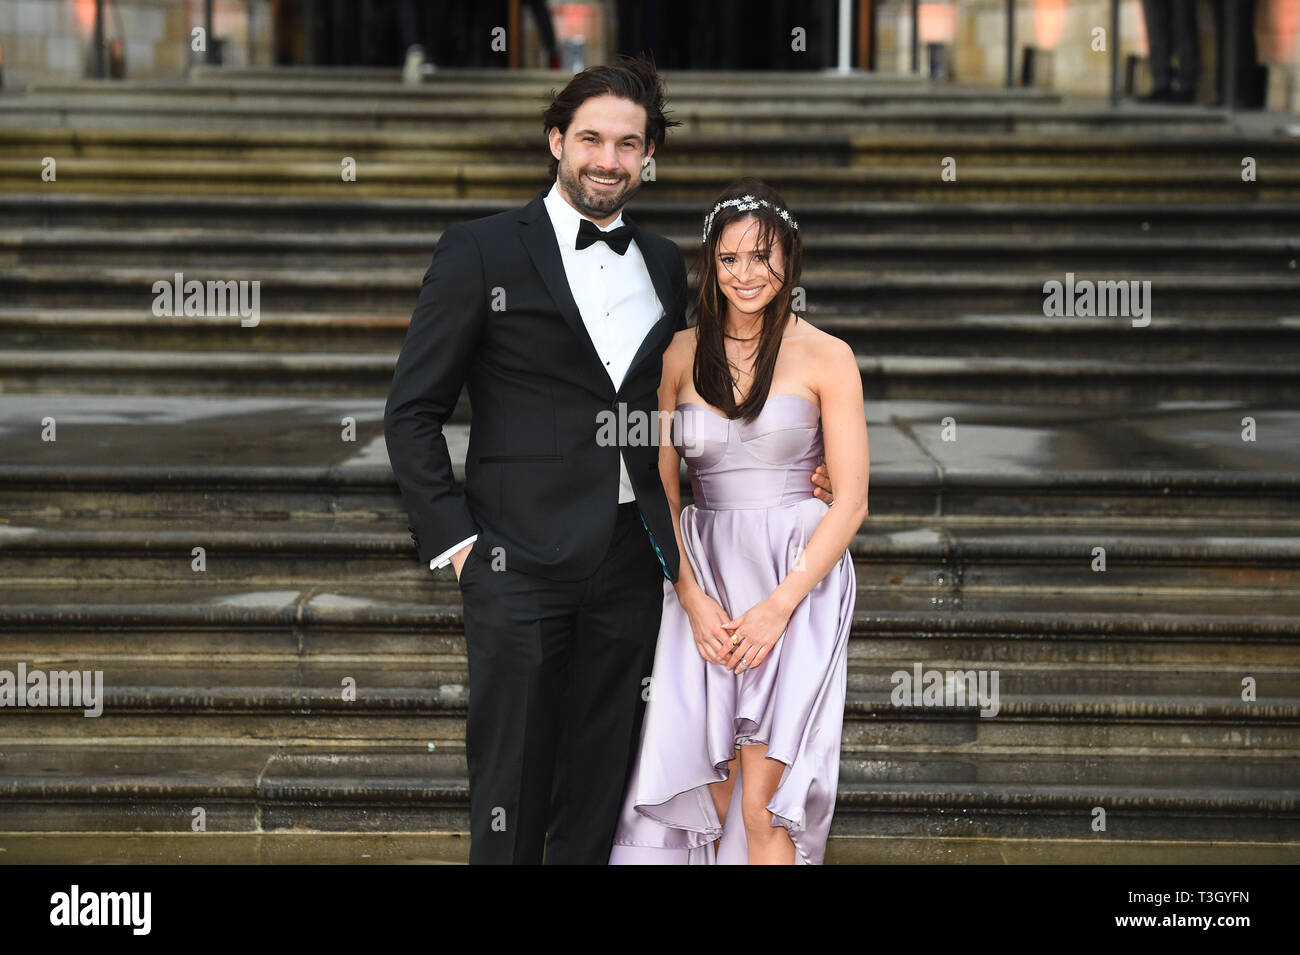 Love Island stars Jamie Jewitt and Camilla Thurlow arrive to attend the global premiere of Netflix's 'Our Planet' at the Natural History Museum in Kensington, London. Stock Photo